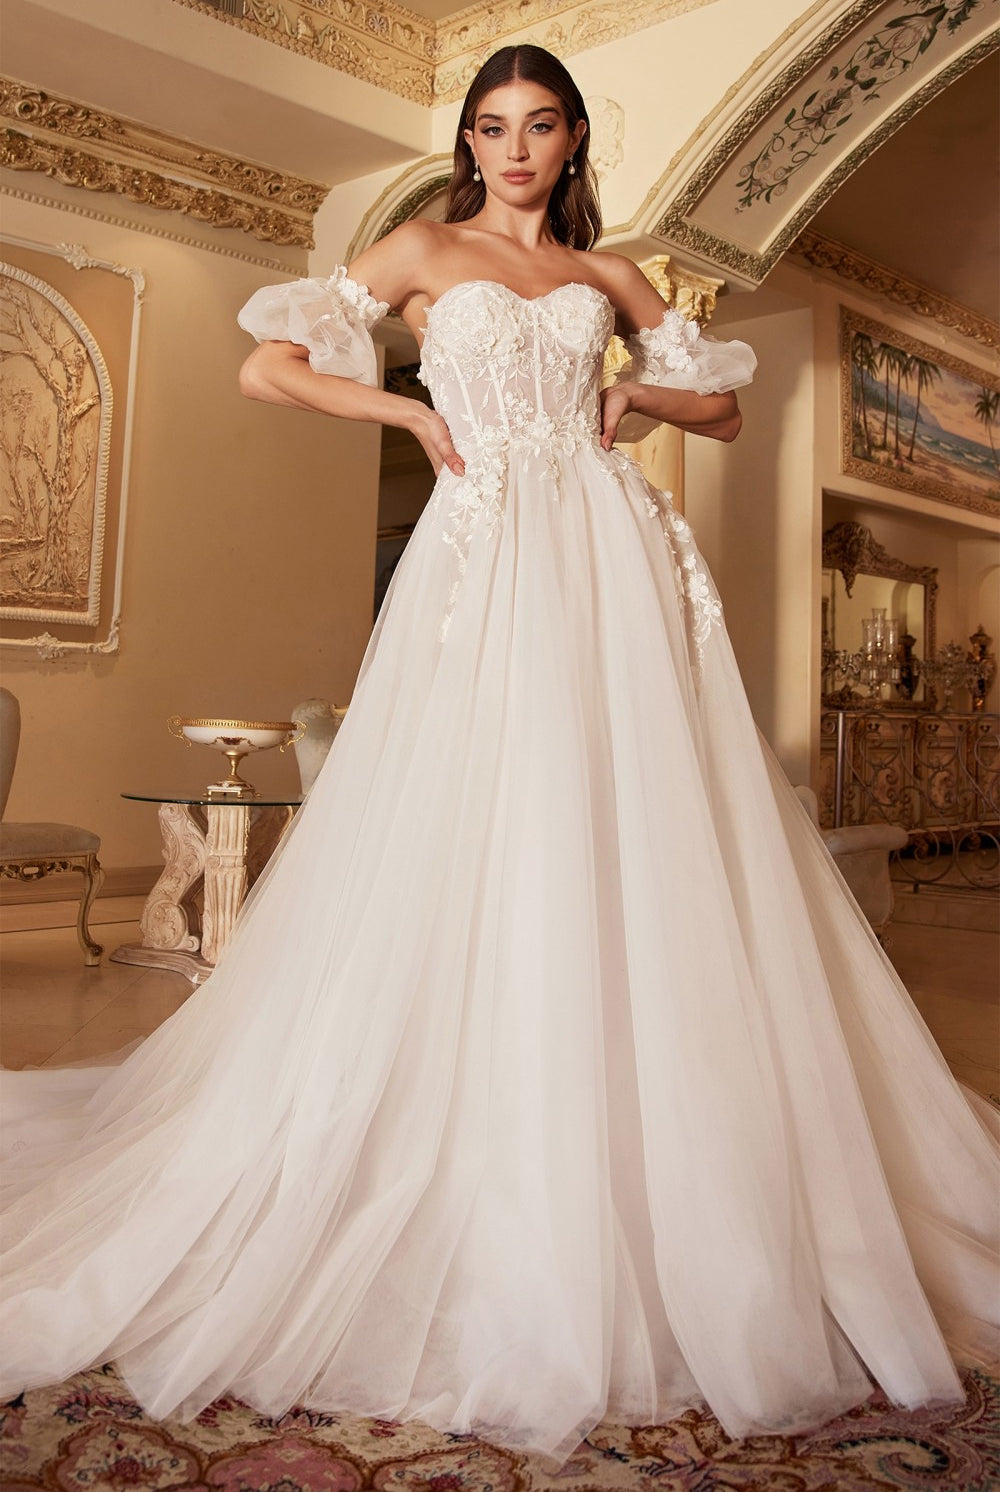 Retro floral gown with sweetheart bodice, puff sleeves, and white bridal look-smcdress